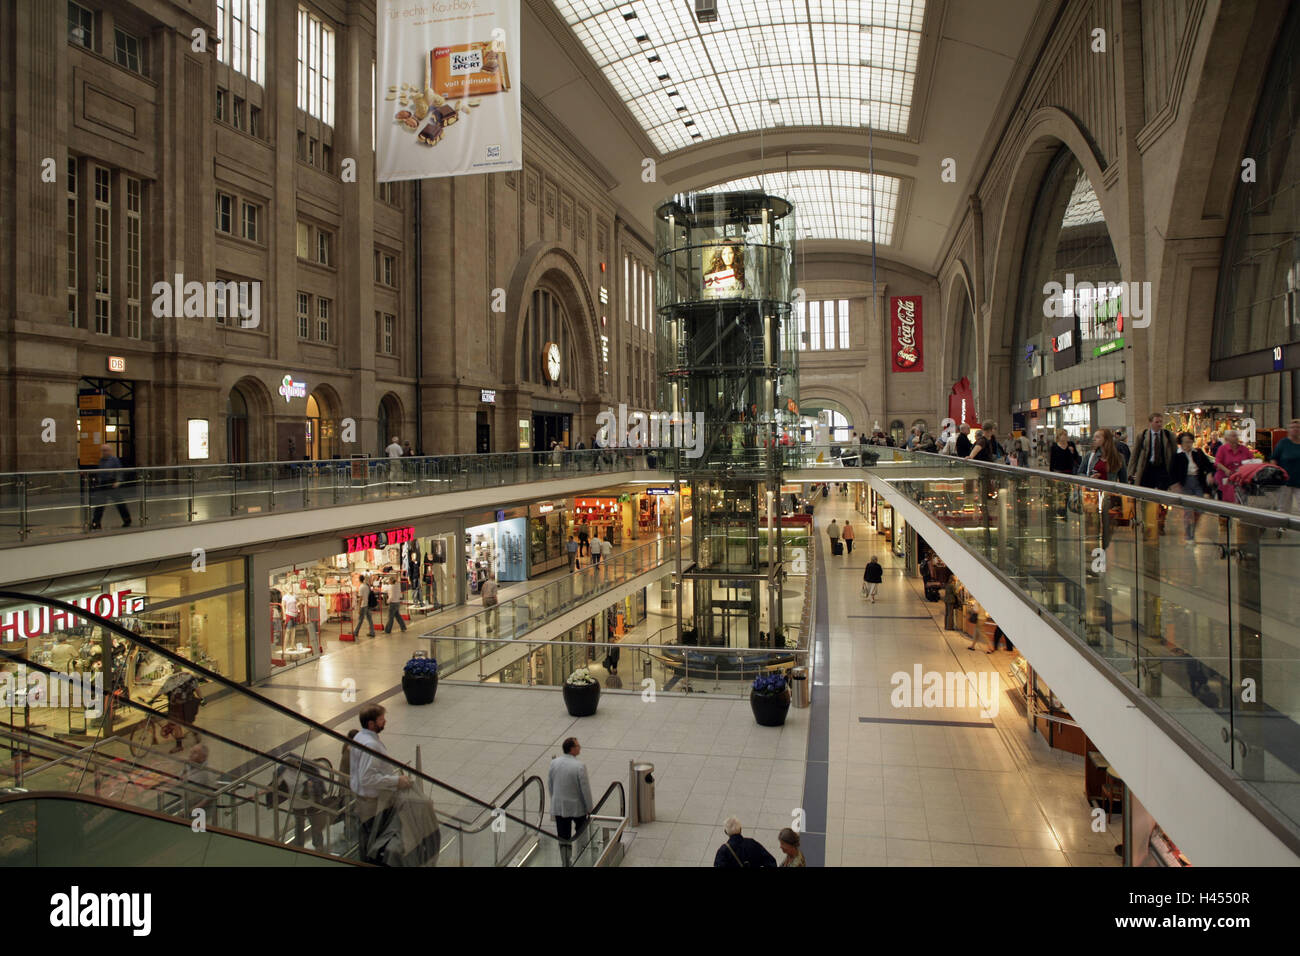 Germany, Saxony, Leipzig, central station, shopping centre, town, city, destination, railway station, shopping, purchasing, inside, architecture, shops, gallery, person, escalator, glass roof, Stock Photo